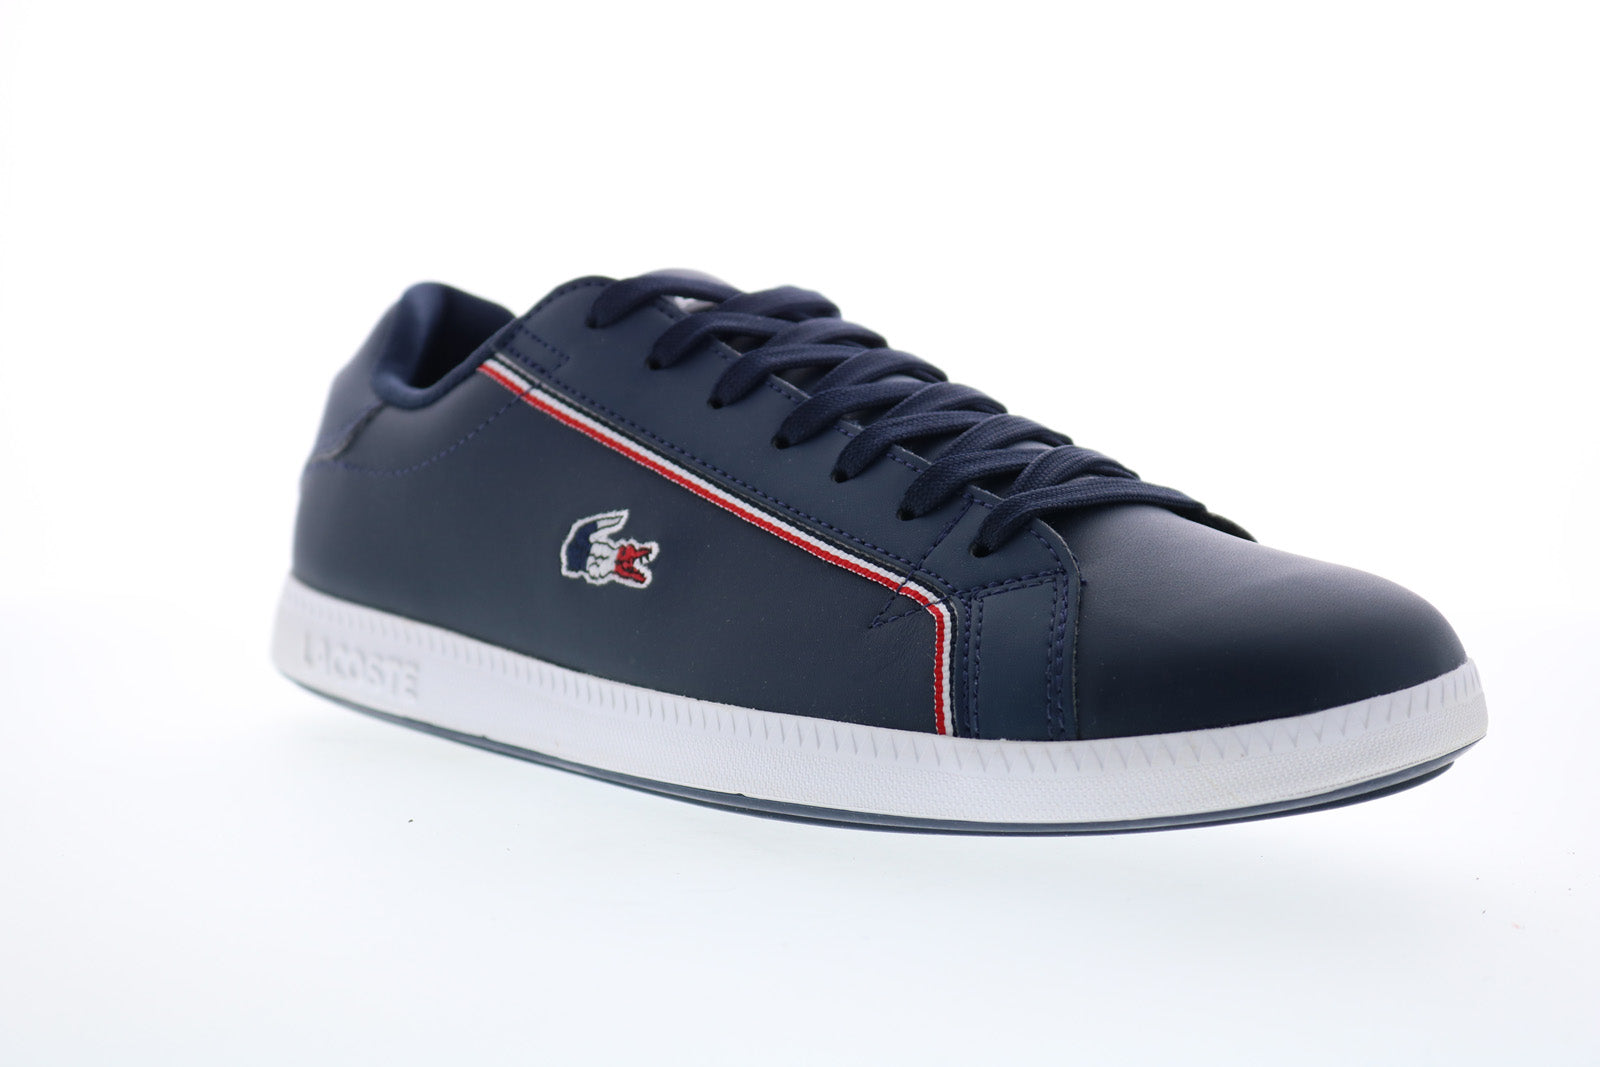 omhyggeligt slank Withered Lacoste Graduate 119 3 Sma Mens Blue Leather Lace Up Lifestyle Sneaker -  Ruze Shoes